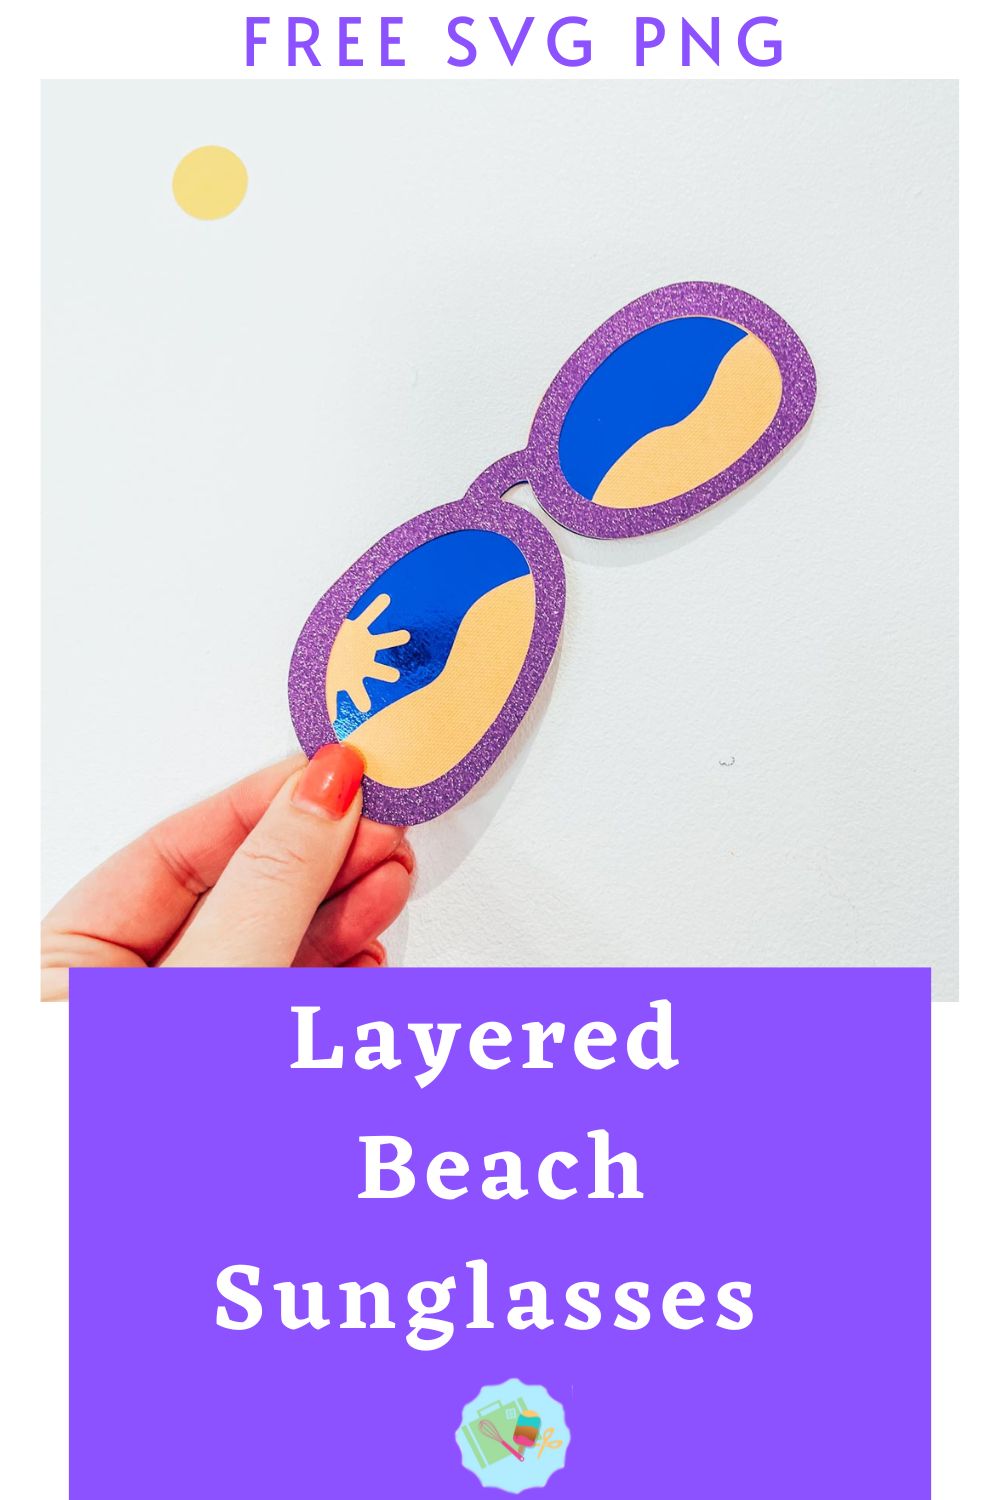 Free SVG Layered Sunglasses for Cricut and Silhouette for crafting and scrapbooking